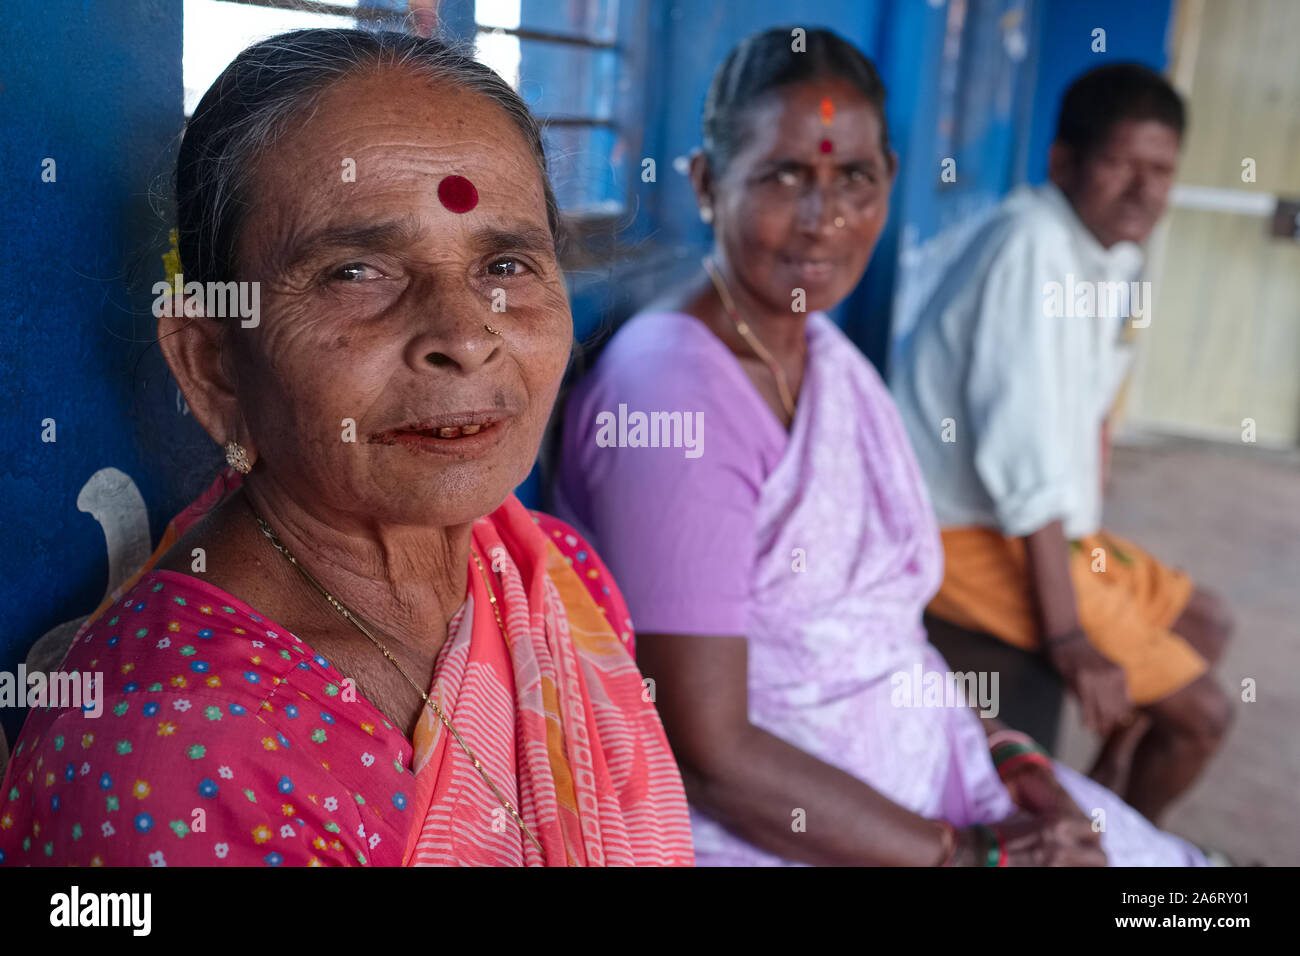 Workers in a fish market in Mangalore, Karnataka, India, the woman wearing a traditional red bindi mark Stock Photo